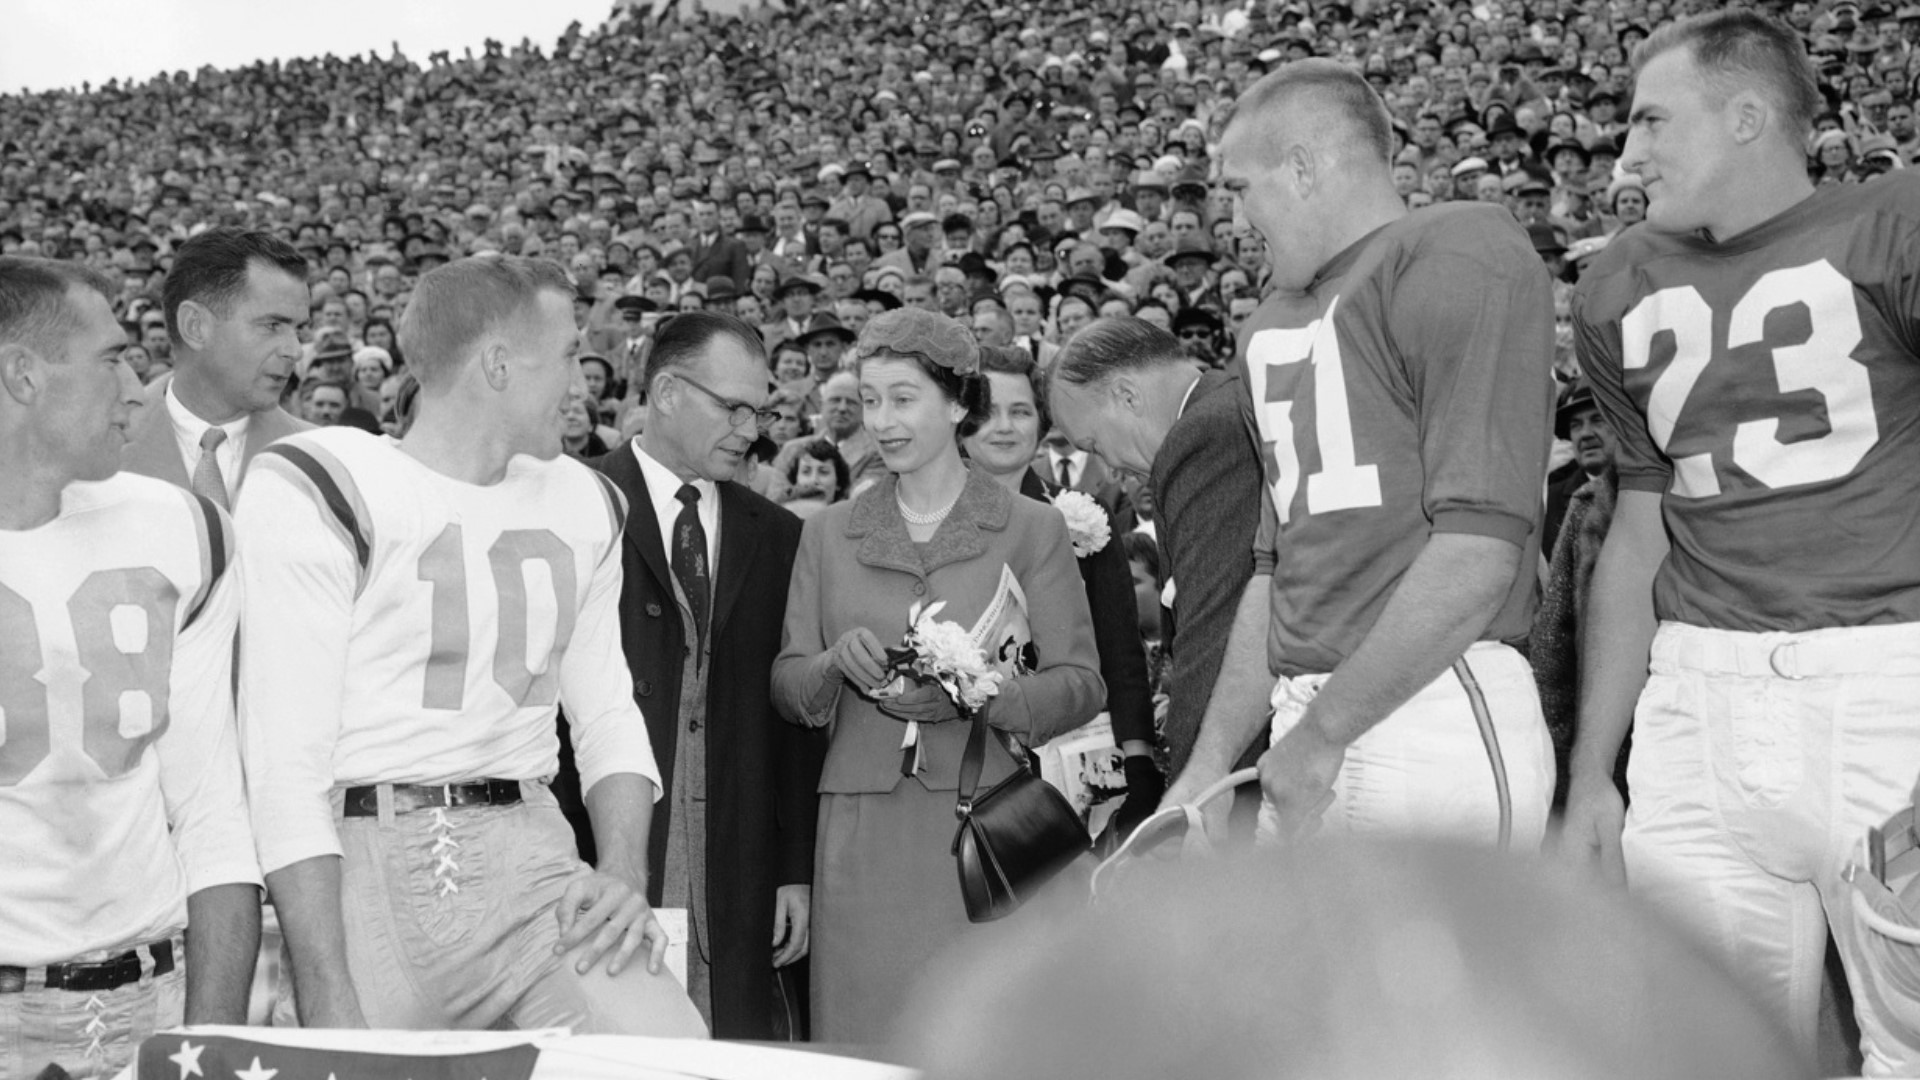 In 1957, she attended a UNC Football game. She left with a special connection to North Carolina.